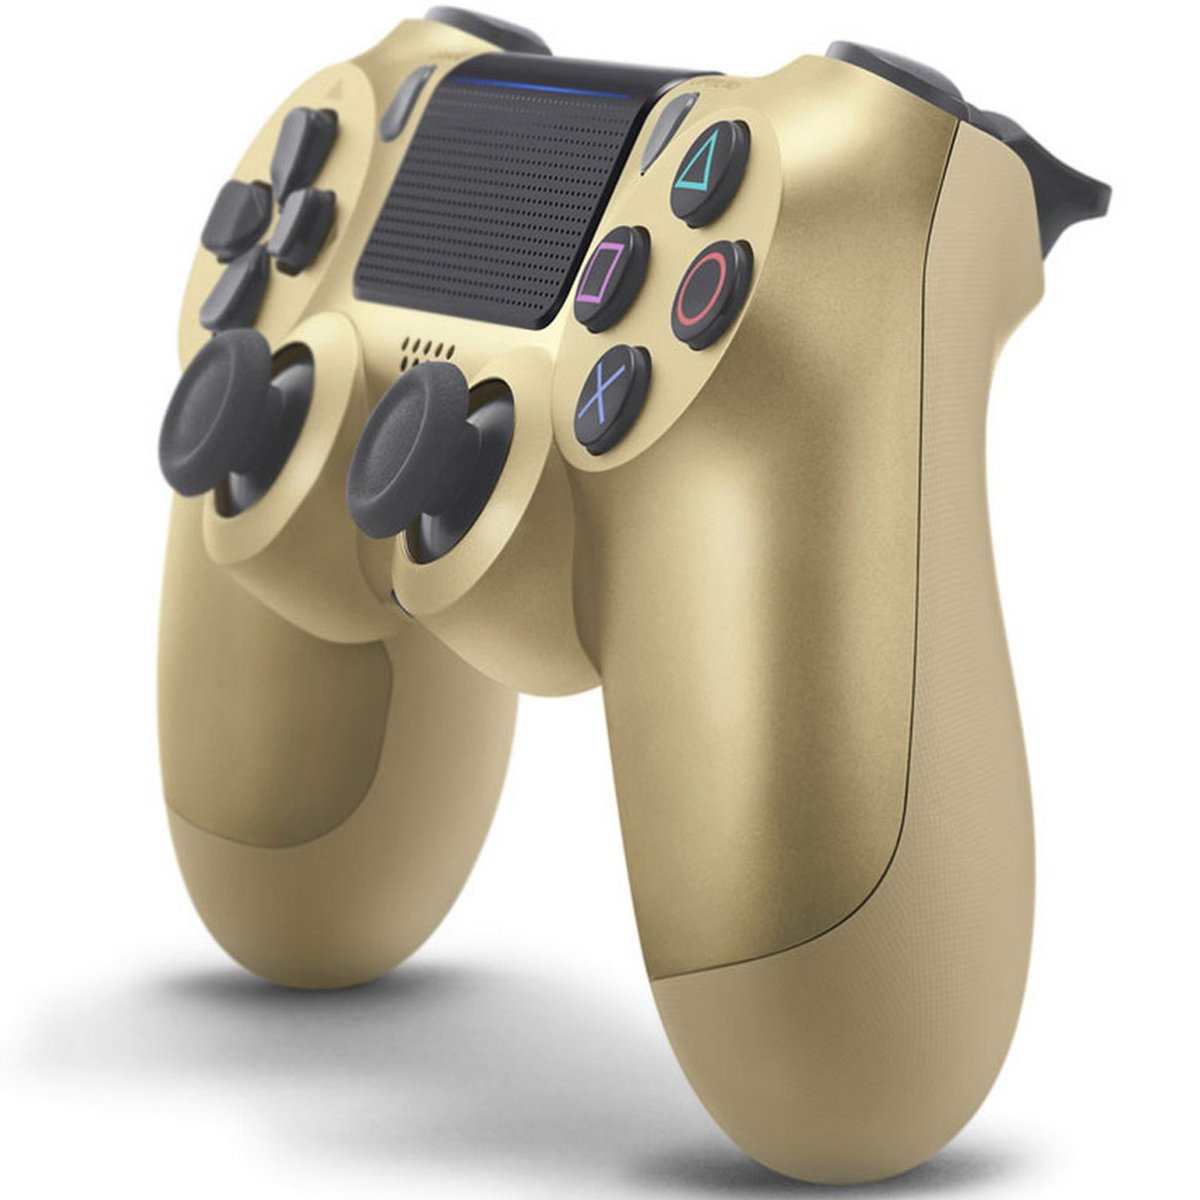 Sony PS4 Controller DS4 V2 Gold